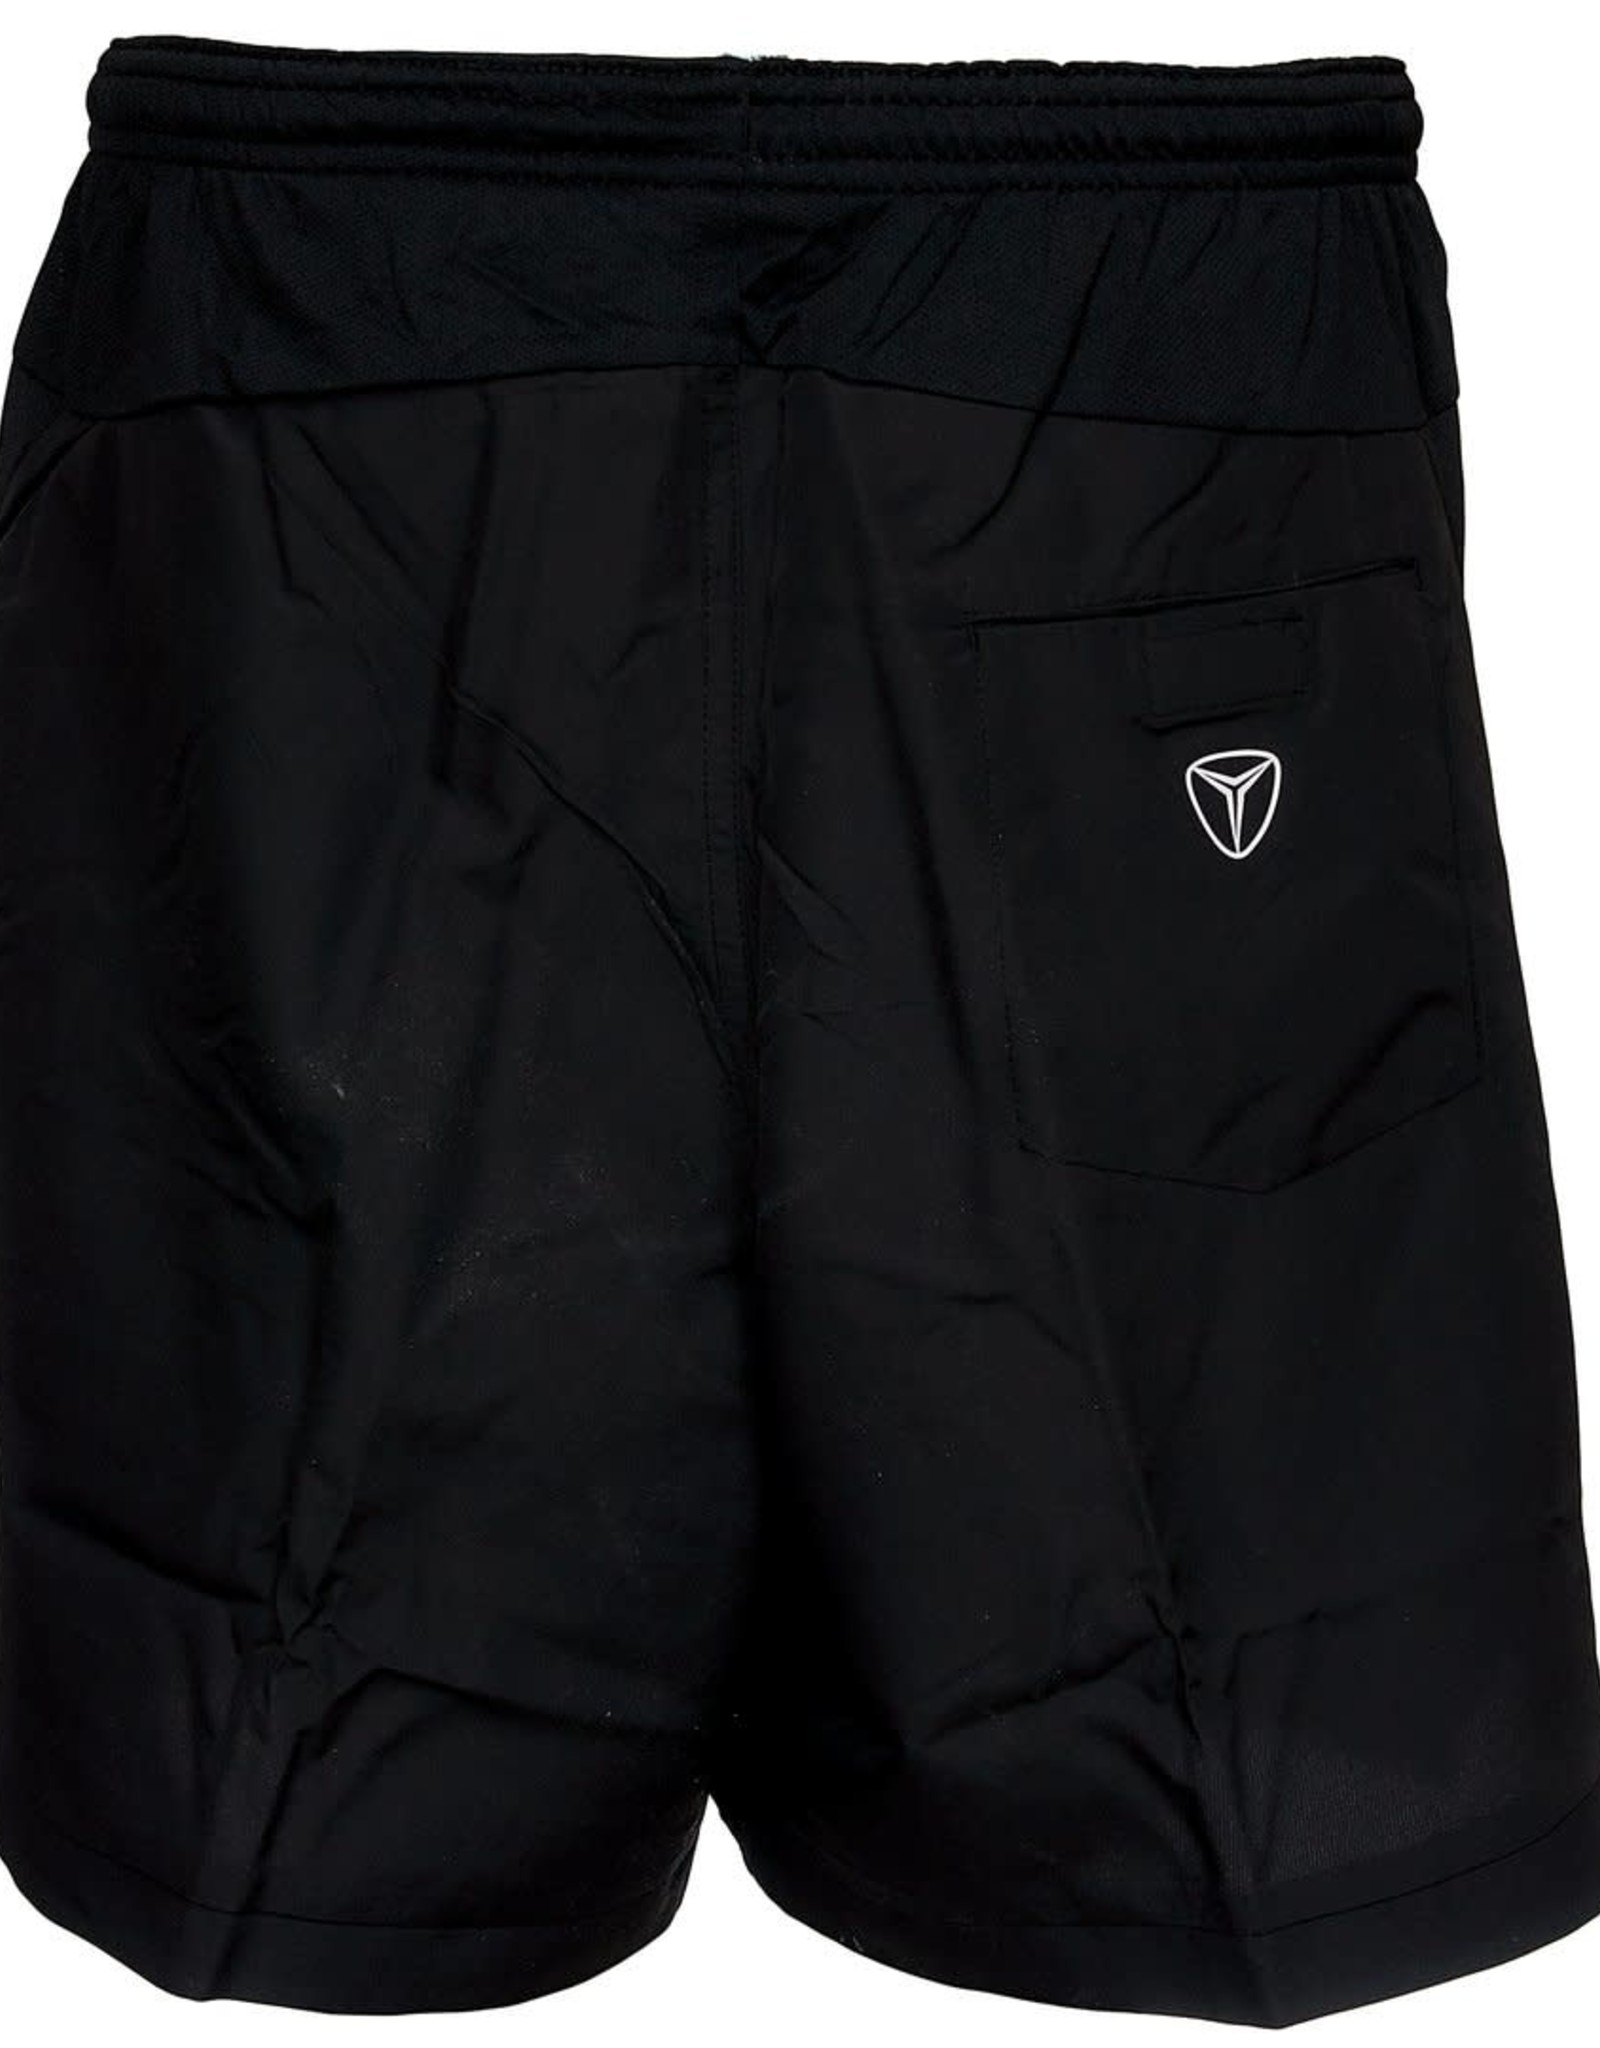 Sporteck YOUTH REFEREE SHORTS